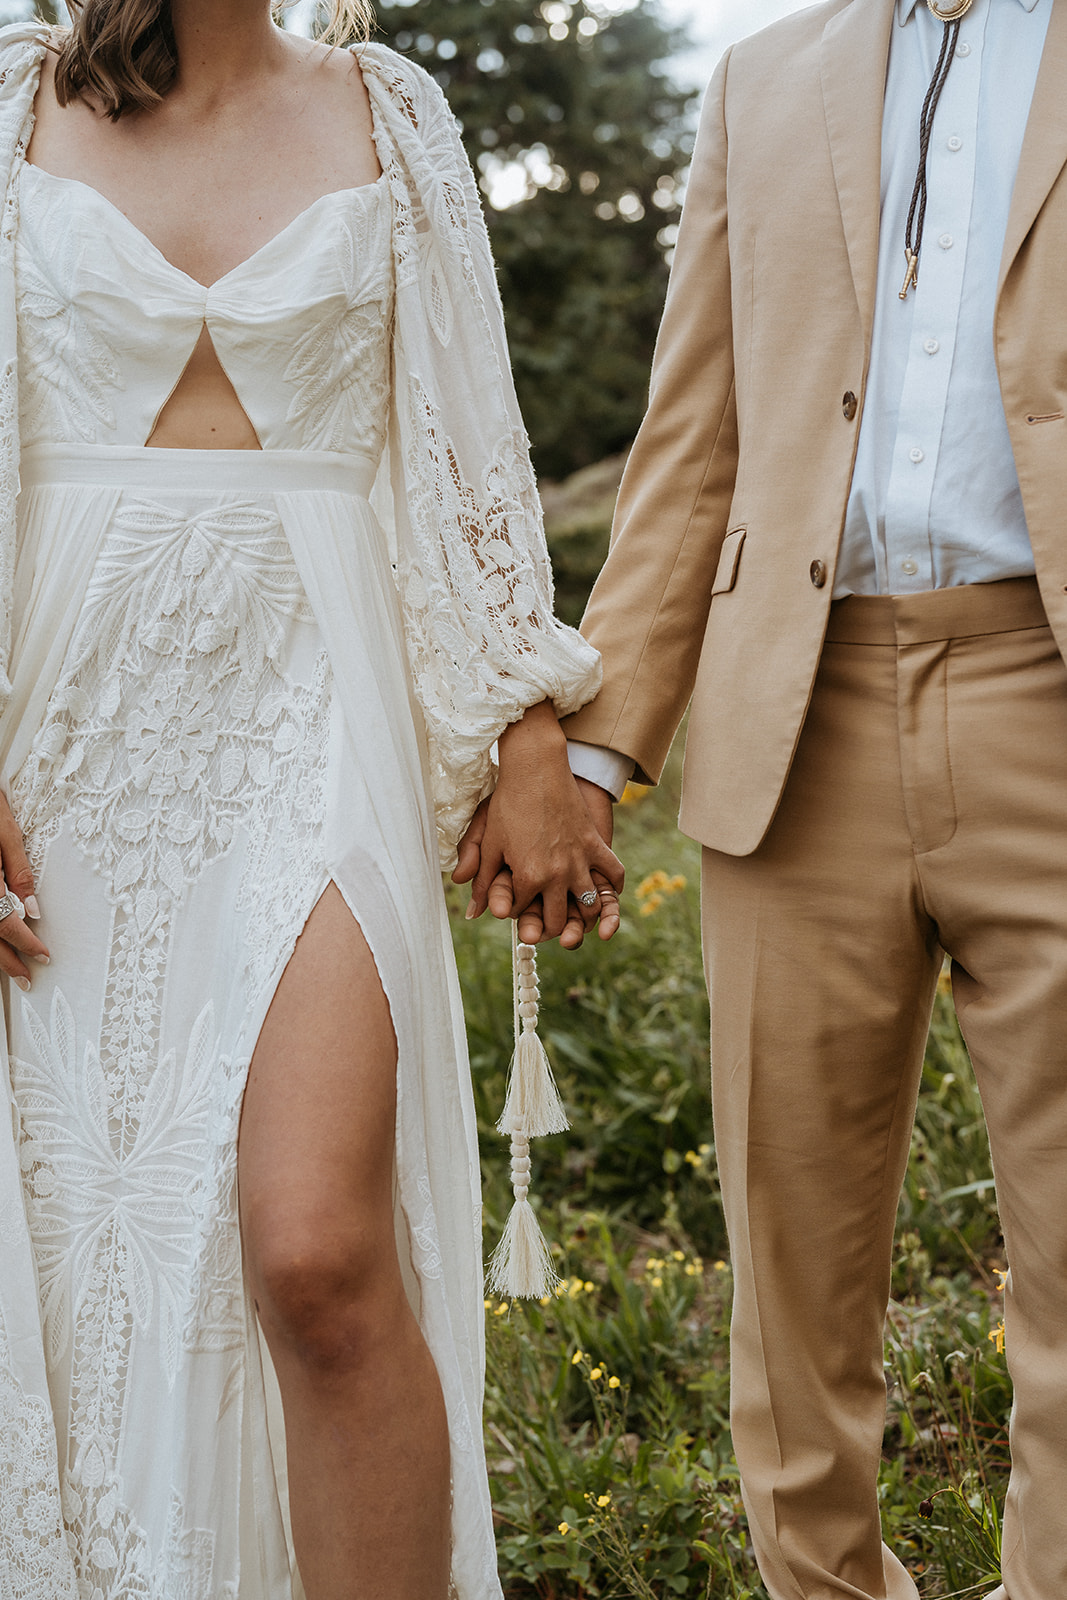 Details of newlyweds holding hands in a lace dress and tan suit on a hillside with wildflowers